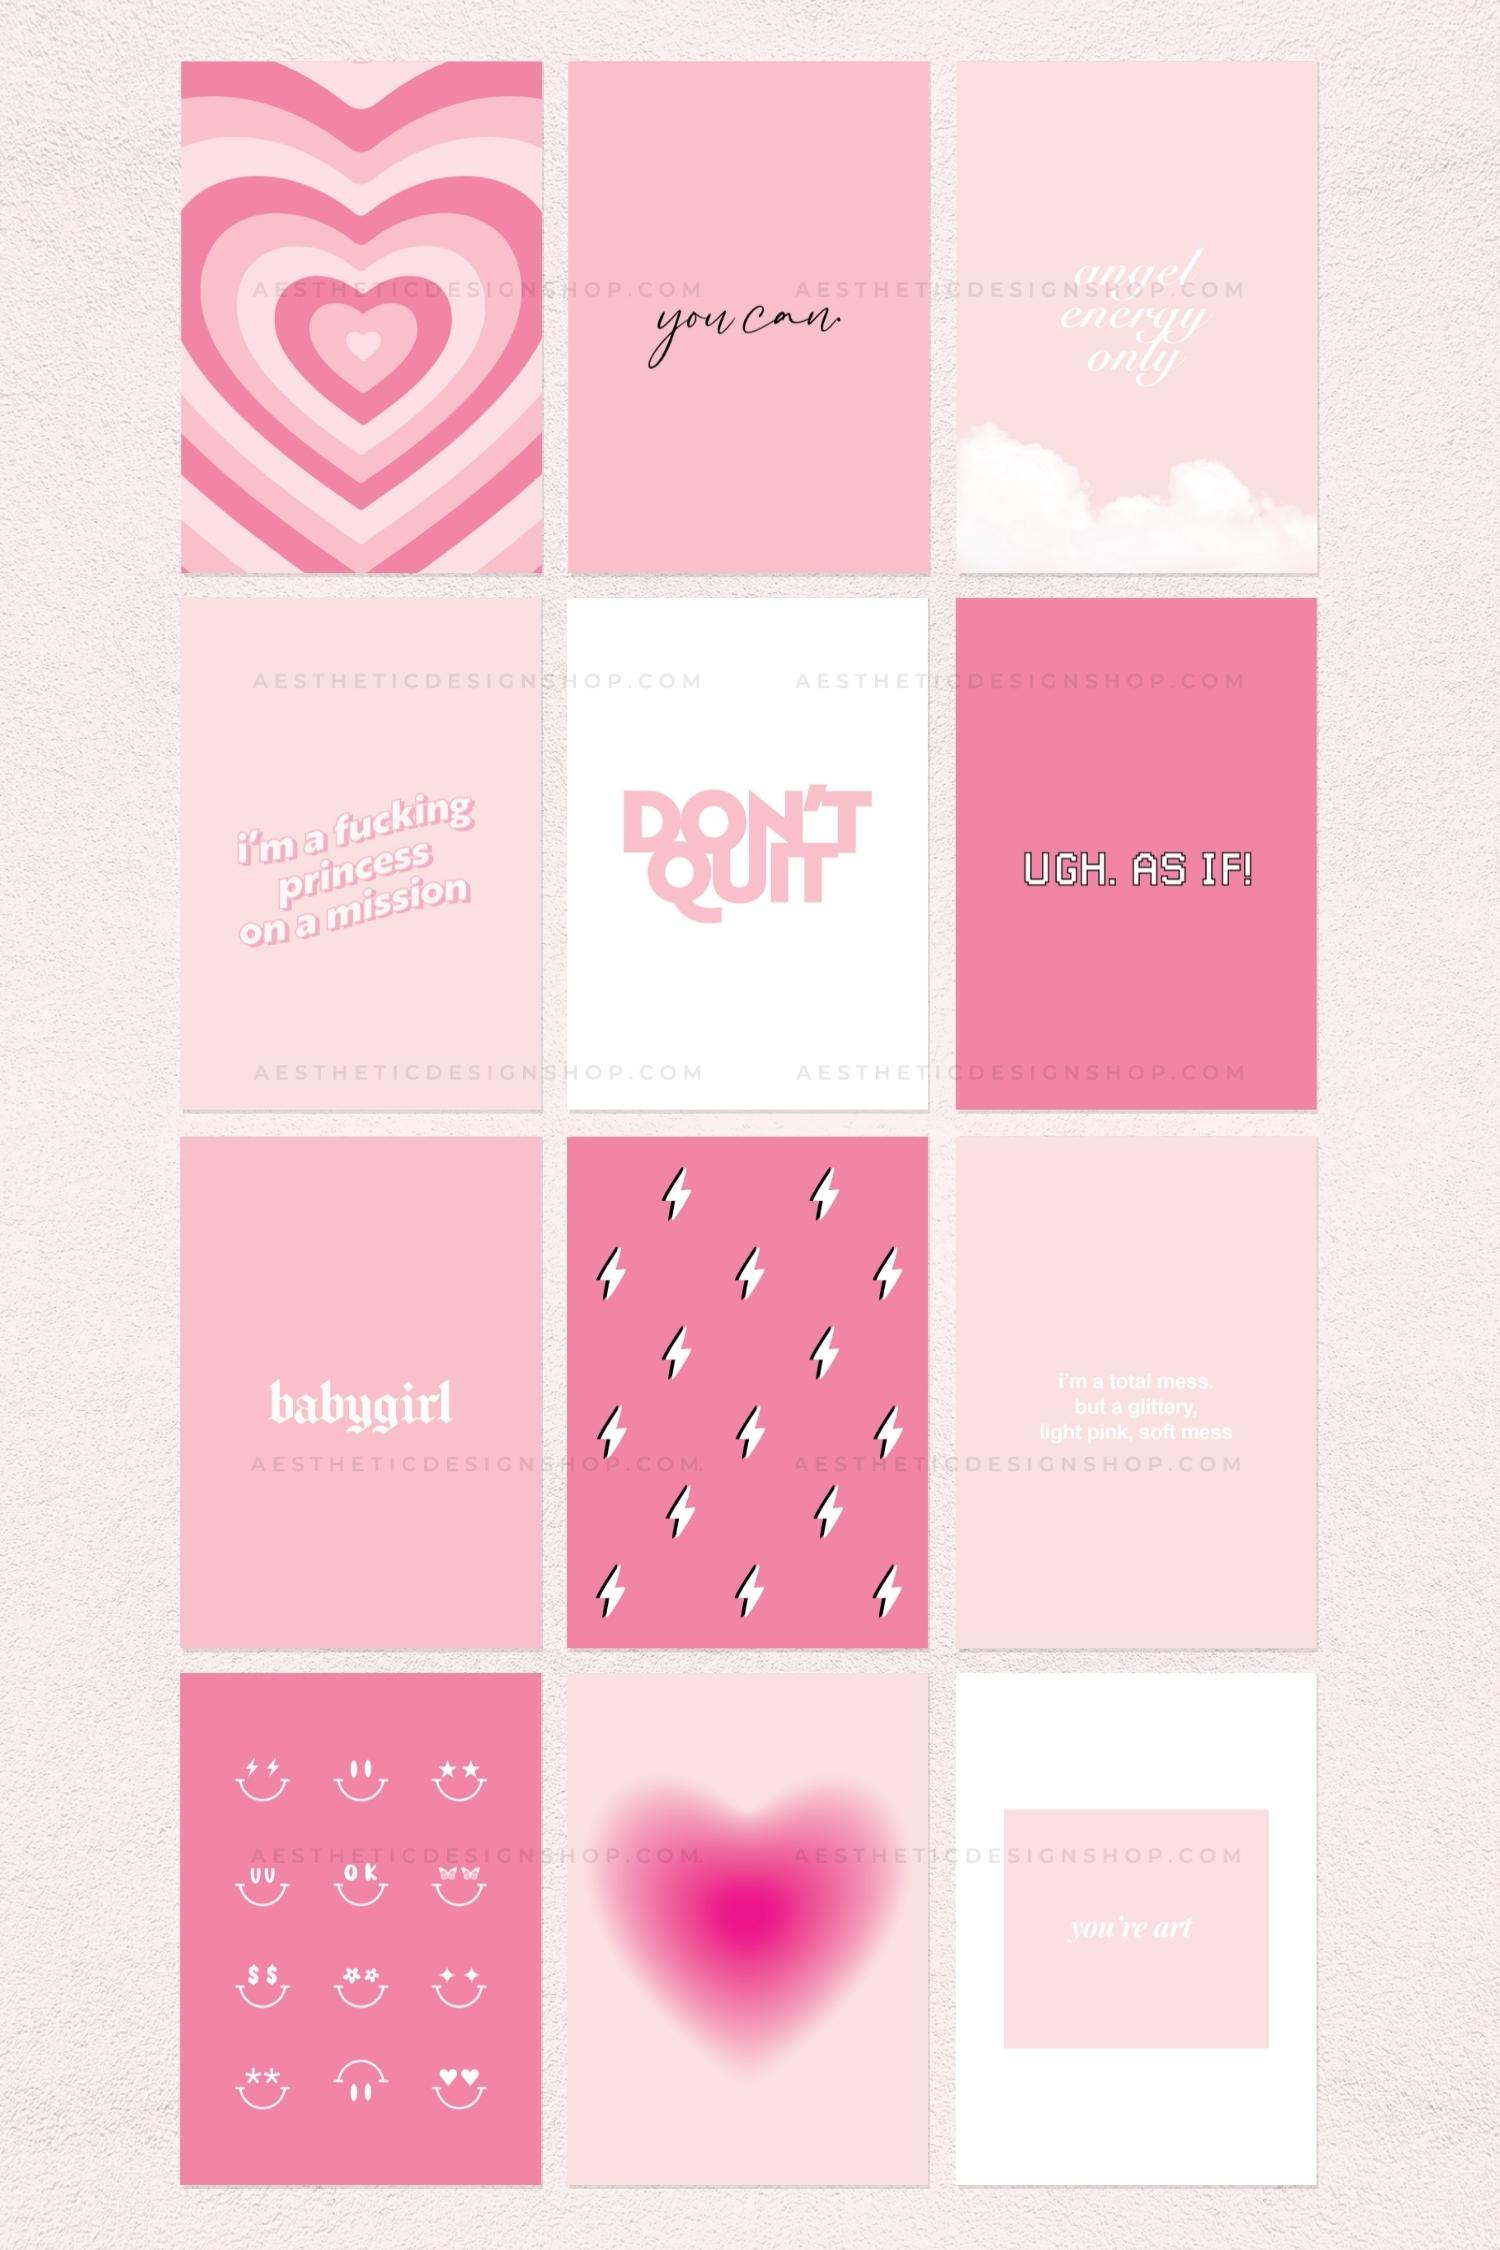 Pink aesthetic high resolution image for wall collages, social media, phone background or other creative projects ⋆ Aesthetic Design Shop